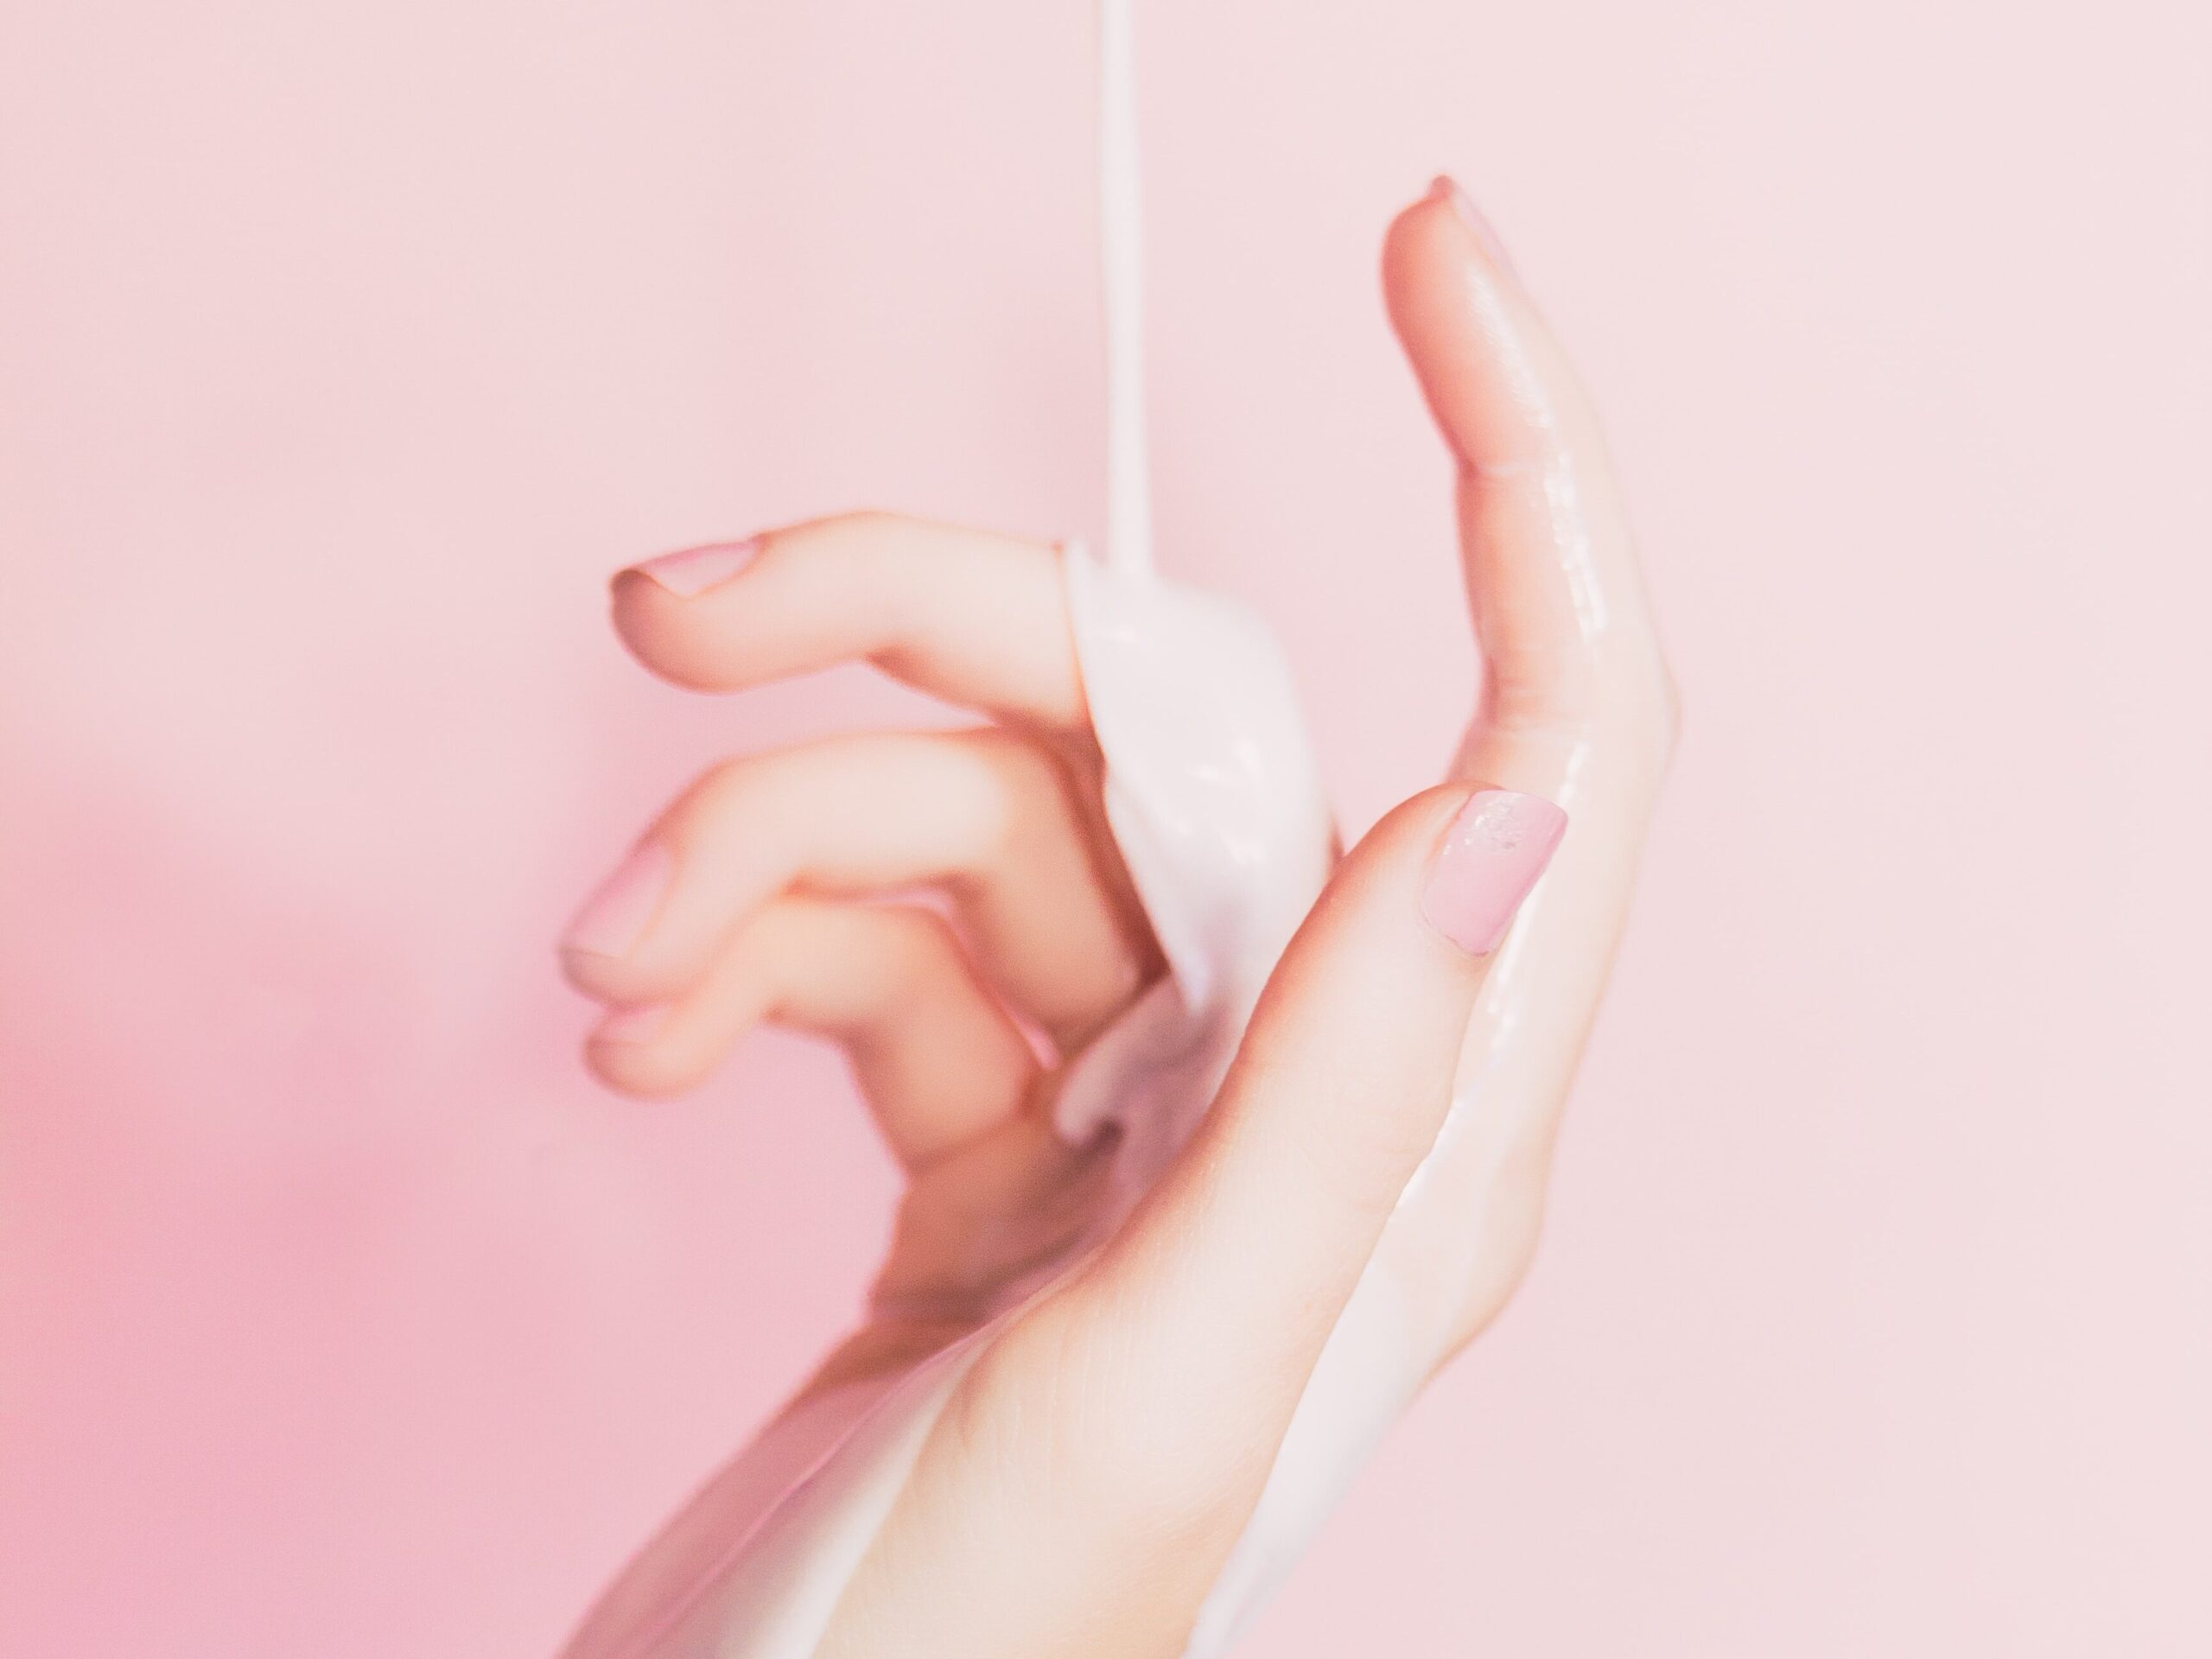 Hand with lotion being poured on it 